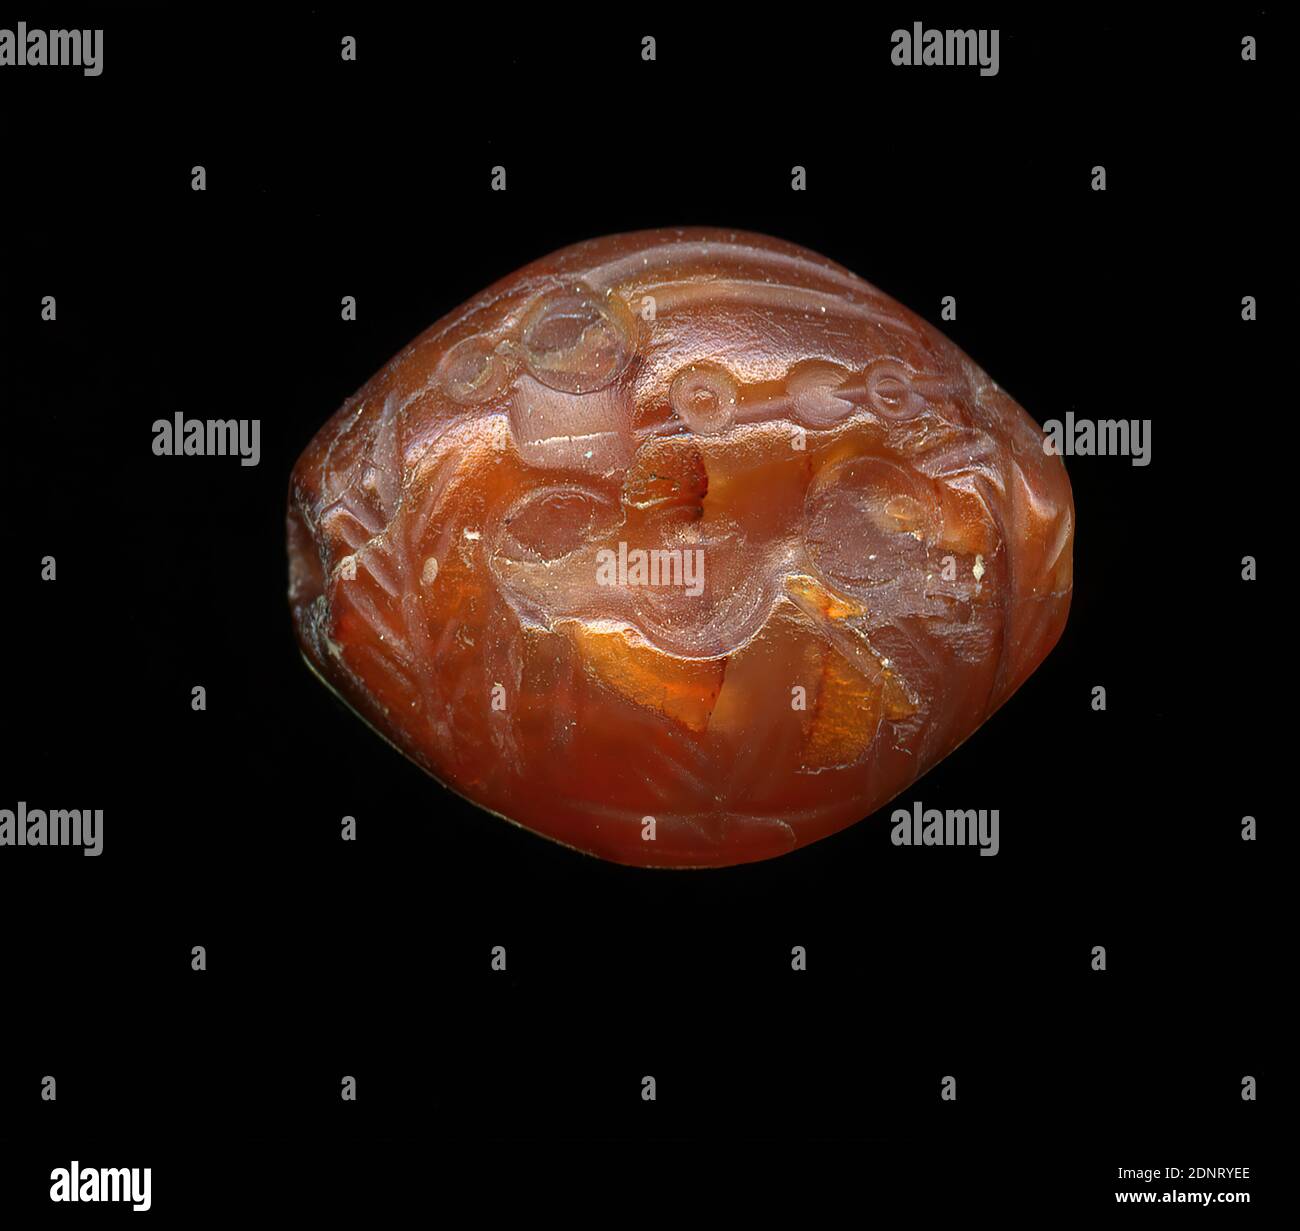 Stamp seal (Bezoar goat hit by a throwing spear), Kunststitfung, Carnelian, cut, drilled, Total: Height: 1,64 cm; Width: 2,02 cm; Depth: 0,88 cm, Body ornamentation, glyptic, goat, Capricorn, The intaglio shows a standing Bezoar goat or Capricorn on the front side. The animal is surrounded by branches, undergrowth or plants. In its neck is a throwing spear. The small rings indicate a knot shaft. A whole group of gems shows only the hit animal; mostly it is wild goats, ibexes or antelopes, rarely cattle. Stock Photo